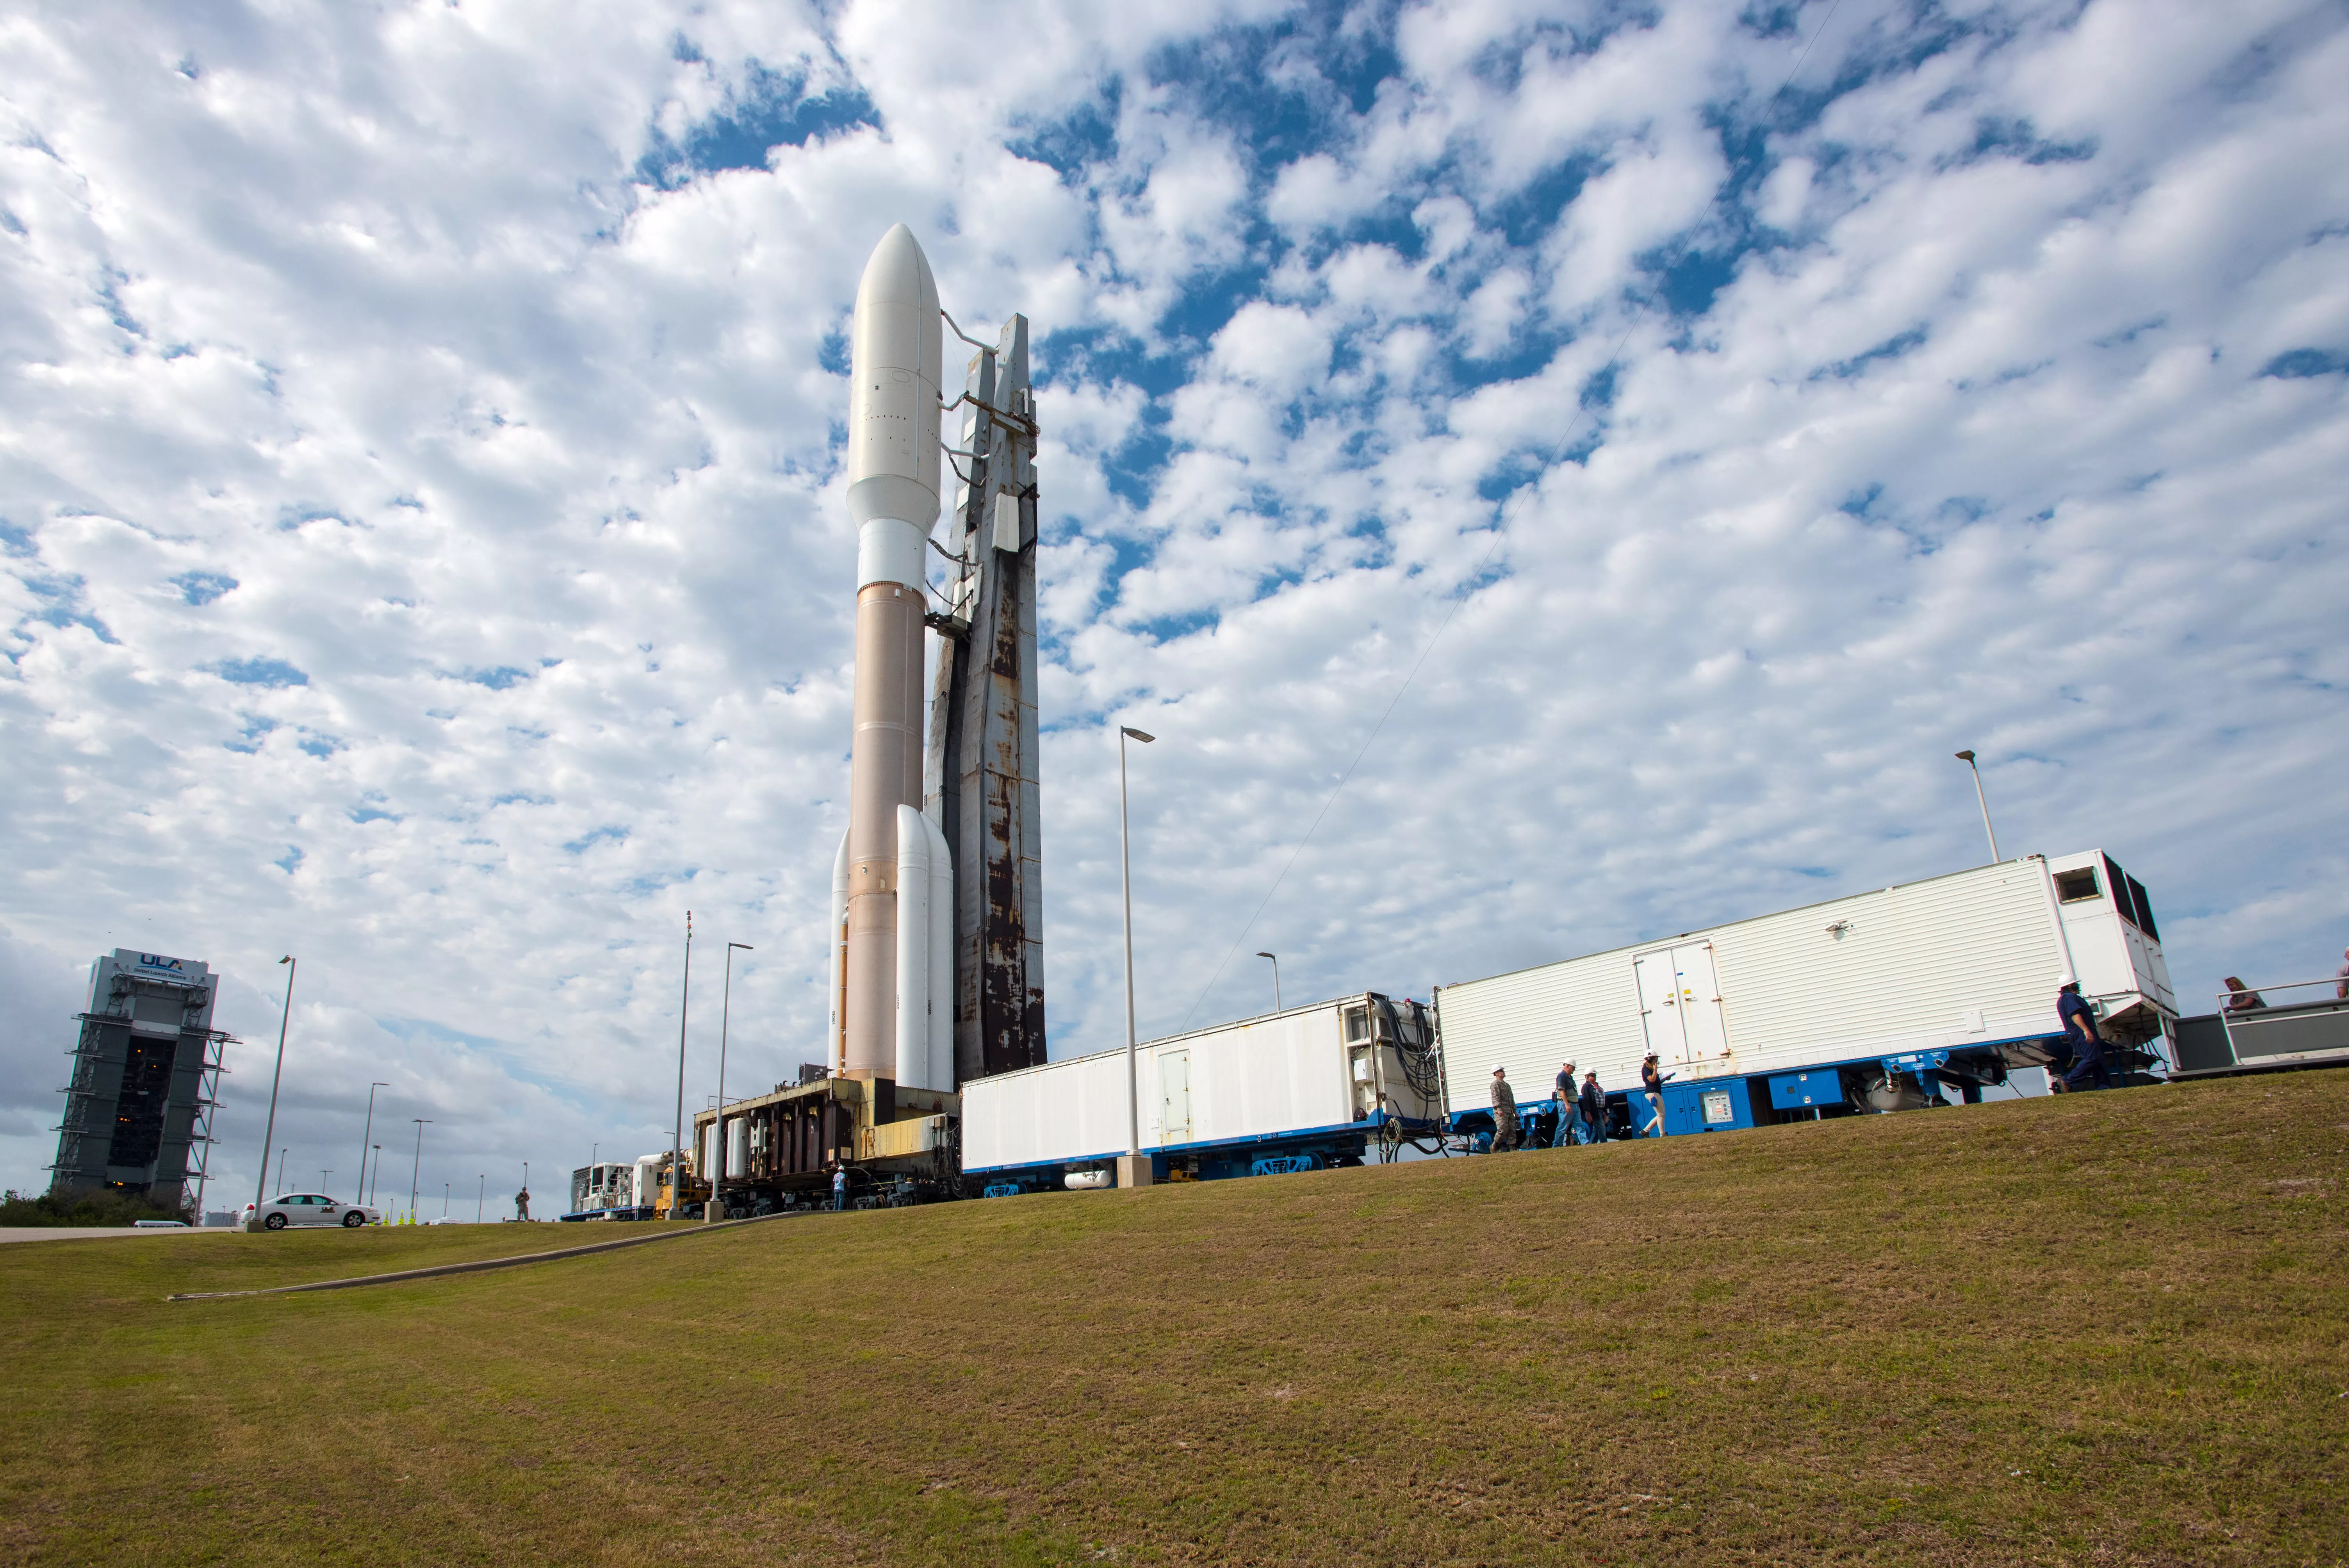 The Atlas V rocket carrying GOES-S rolls from the Vertical Integration Facility to the launch pad at Space Launch Complex-41.